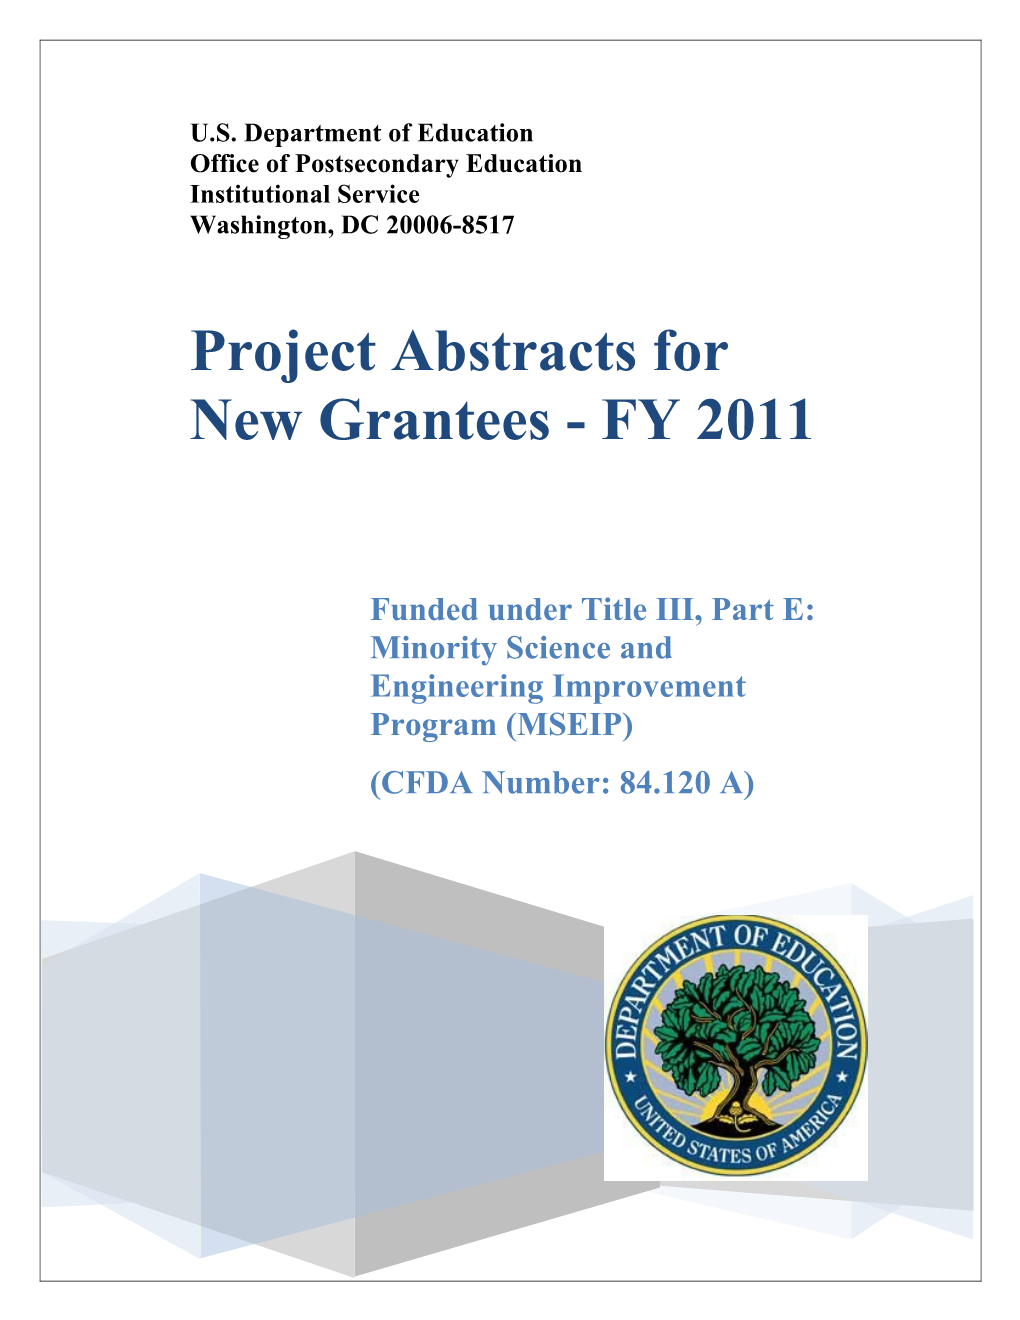 FY 2011 Project Abstracts for the Minority Science and Engineering Improvement Program (MS Word)